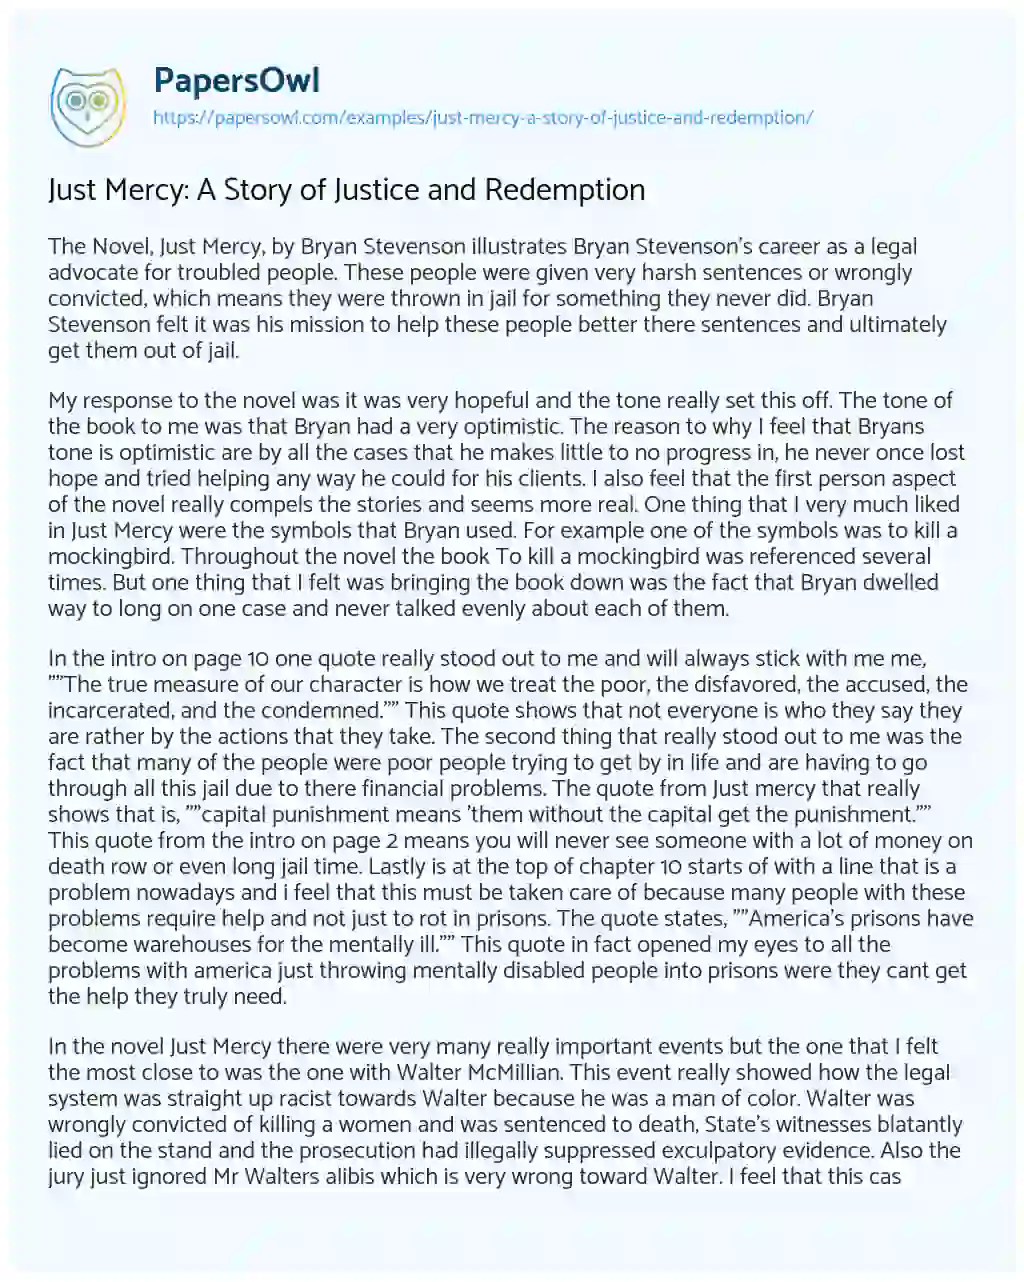 Essay on Just Mercy: a Story of Justice and Redemption